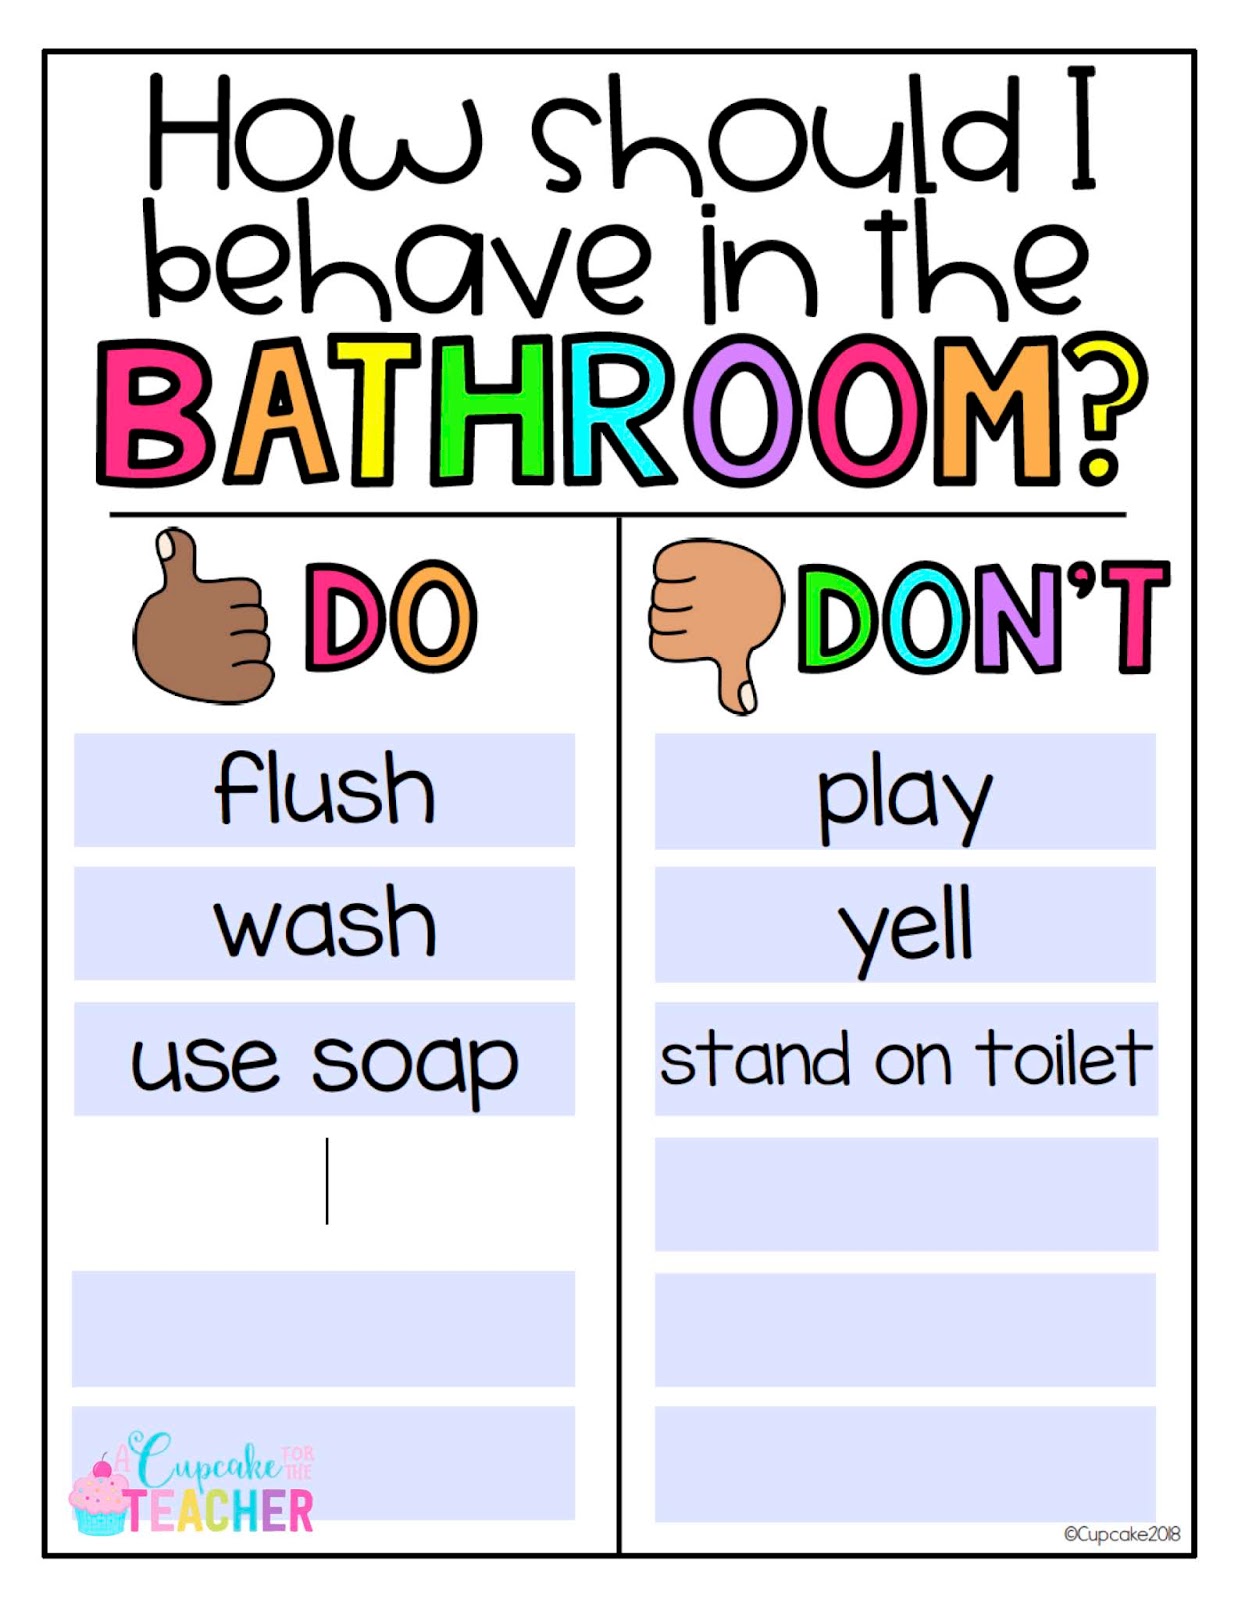 Use these bathroom etiquette anchor charts as a visual reminder for the students in your elementary classroom.